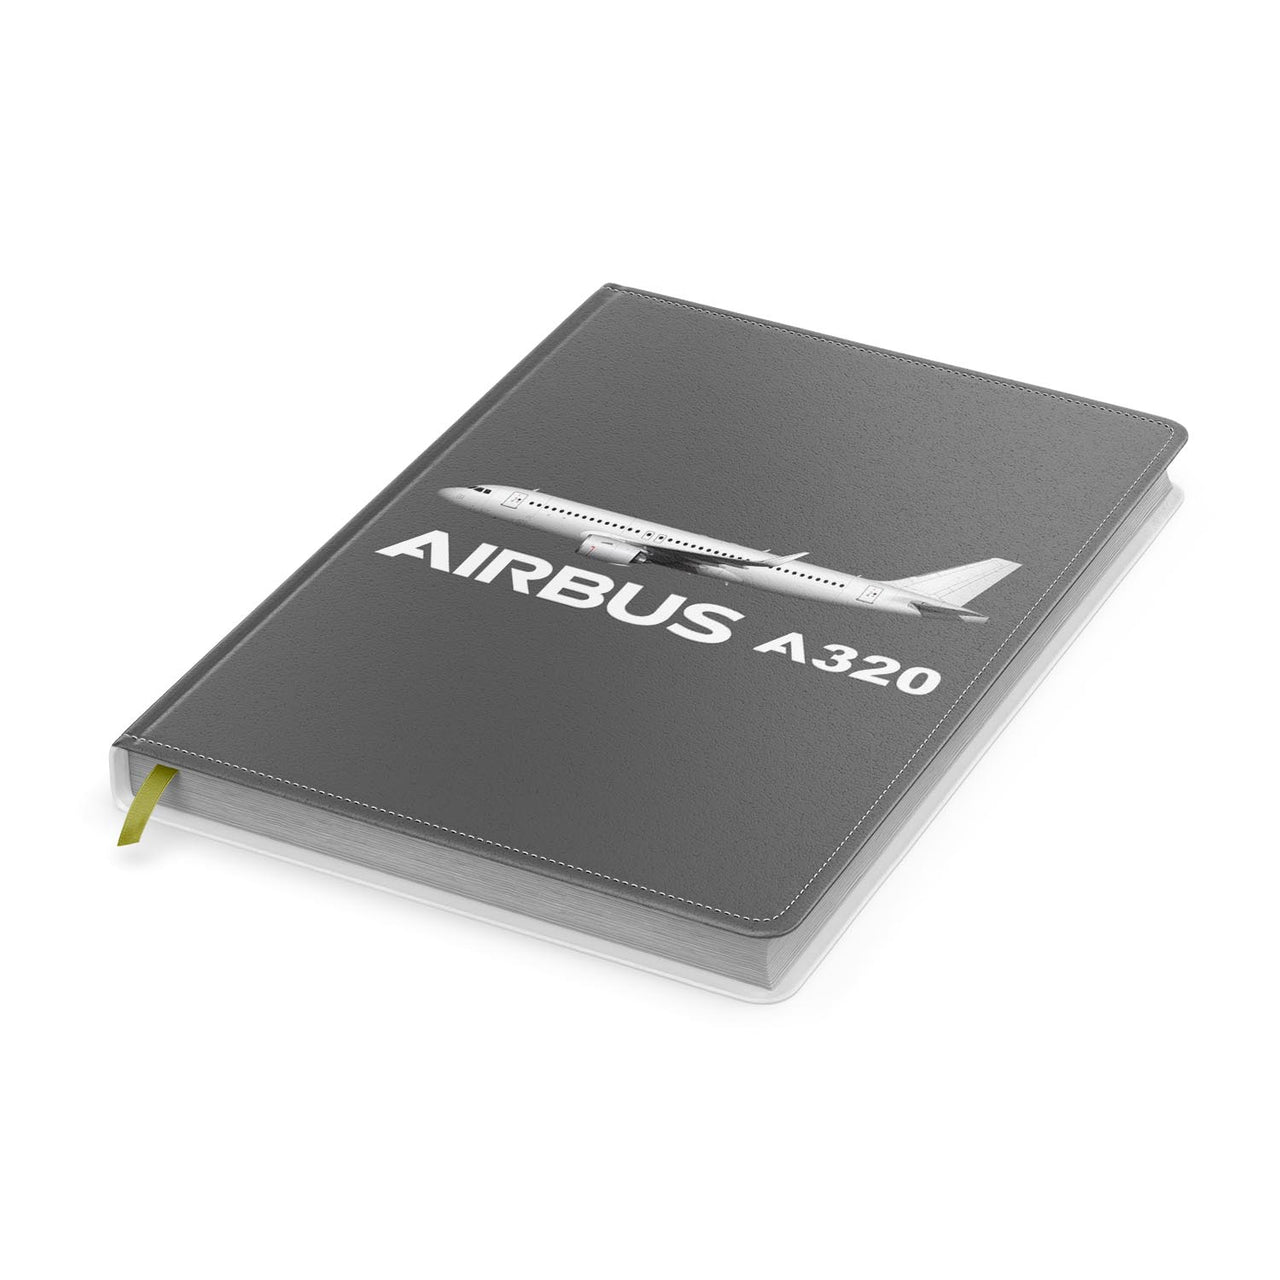 The Airbus A320 Designed Notebooks